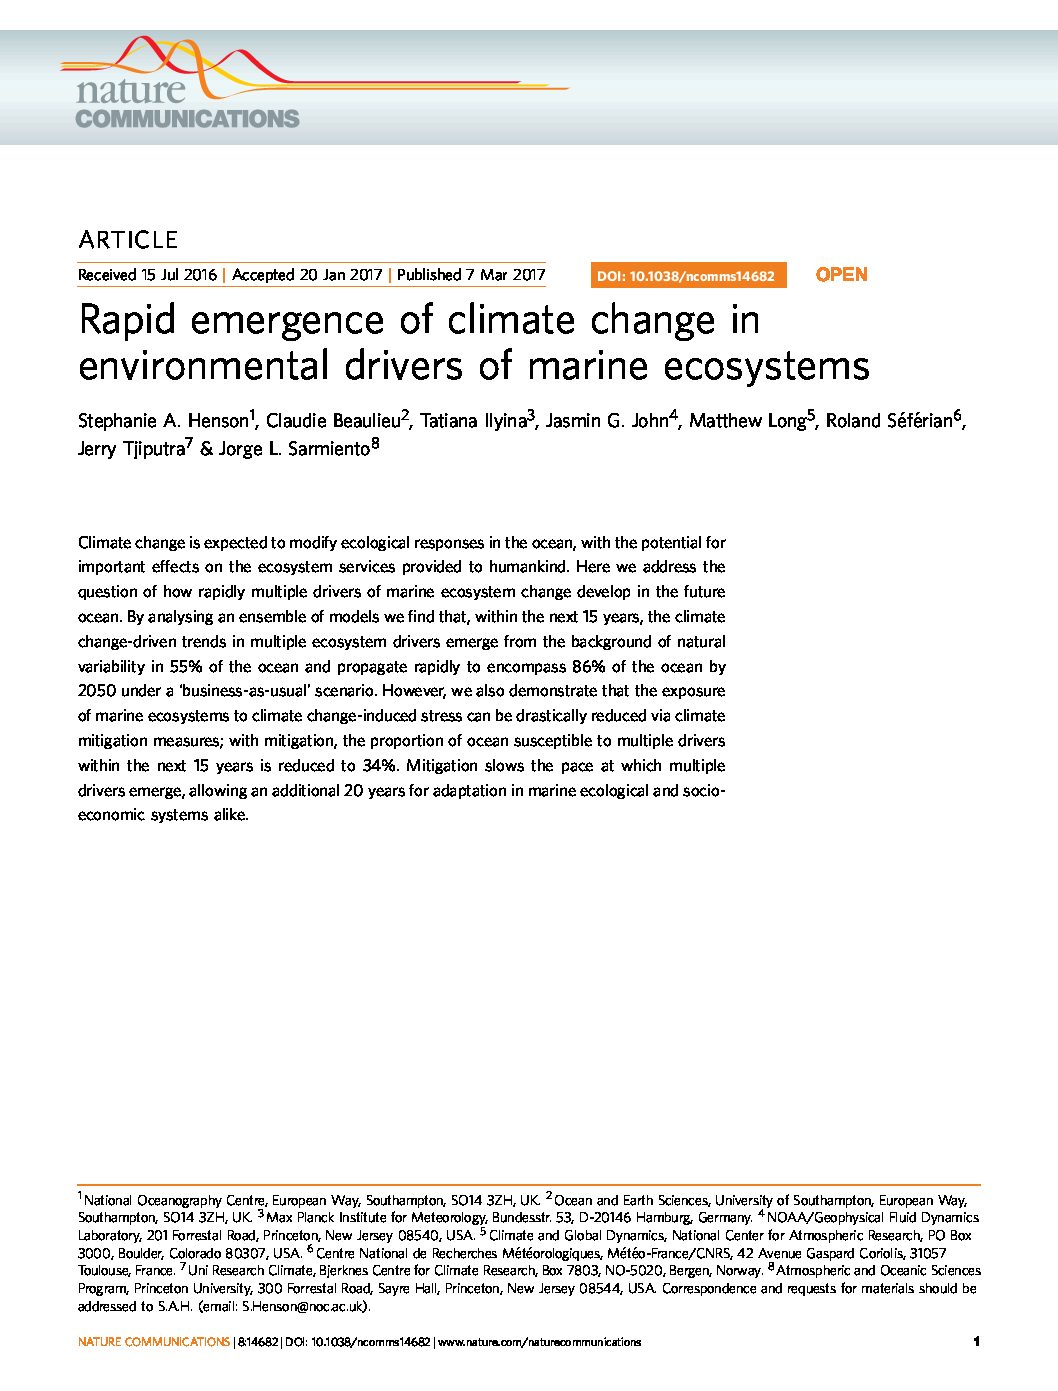 Rapid emergence of climate change in environmental drivers of marine ecosystems